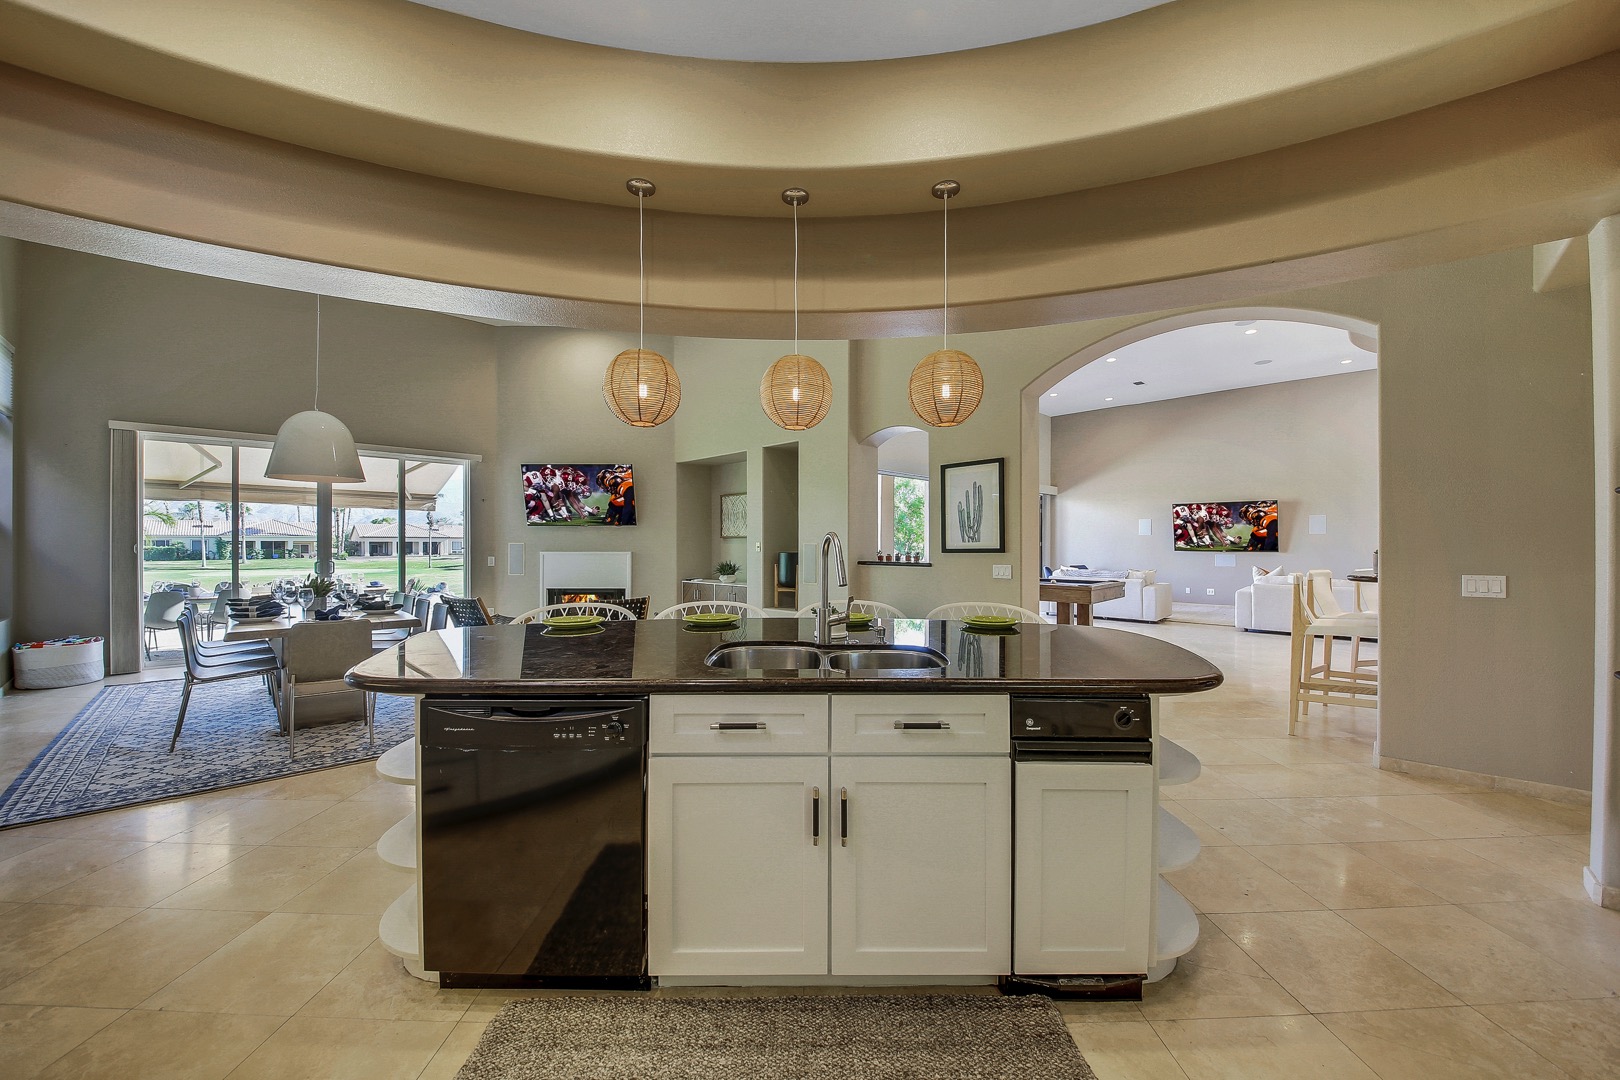 The fully-equipped kitchen is perfectly located next to the dinning room, the open floor plan allows for easy clean-up.